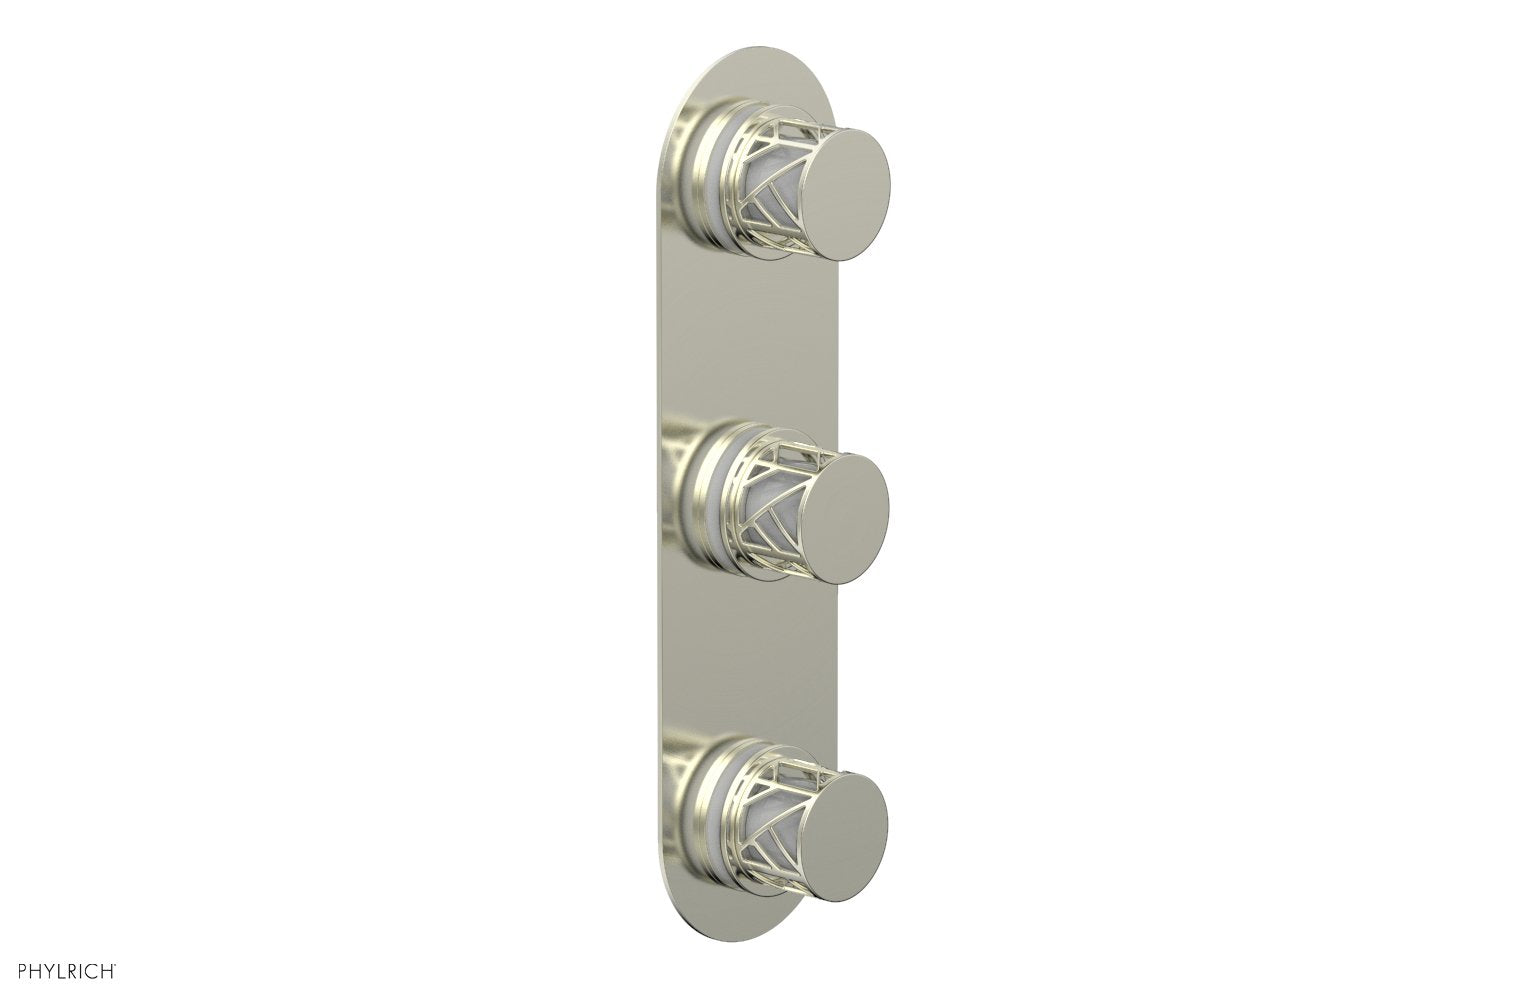 Phylrich JOLIE Thermostatic Valve with Two Volume Control with "White" Accents